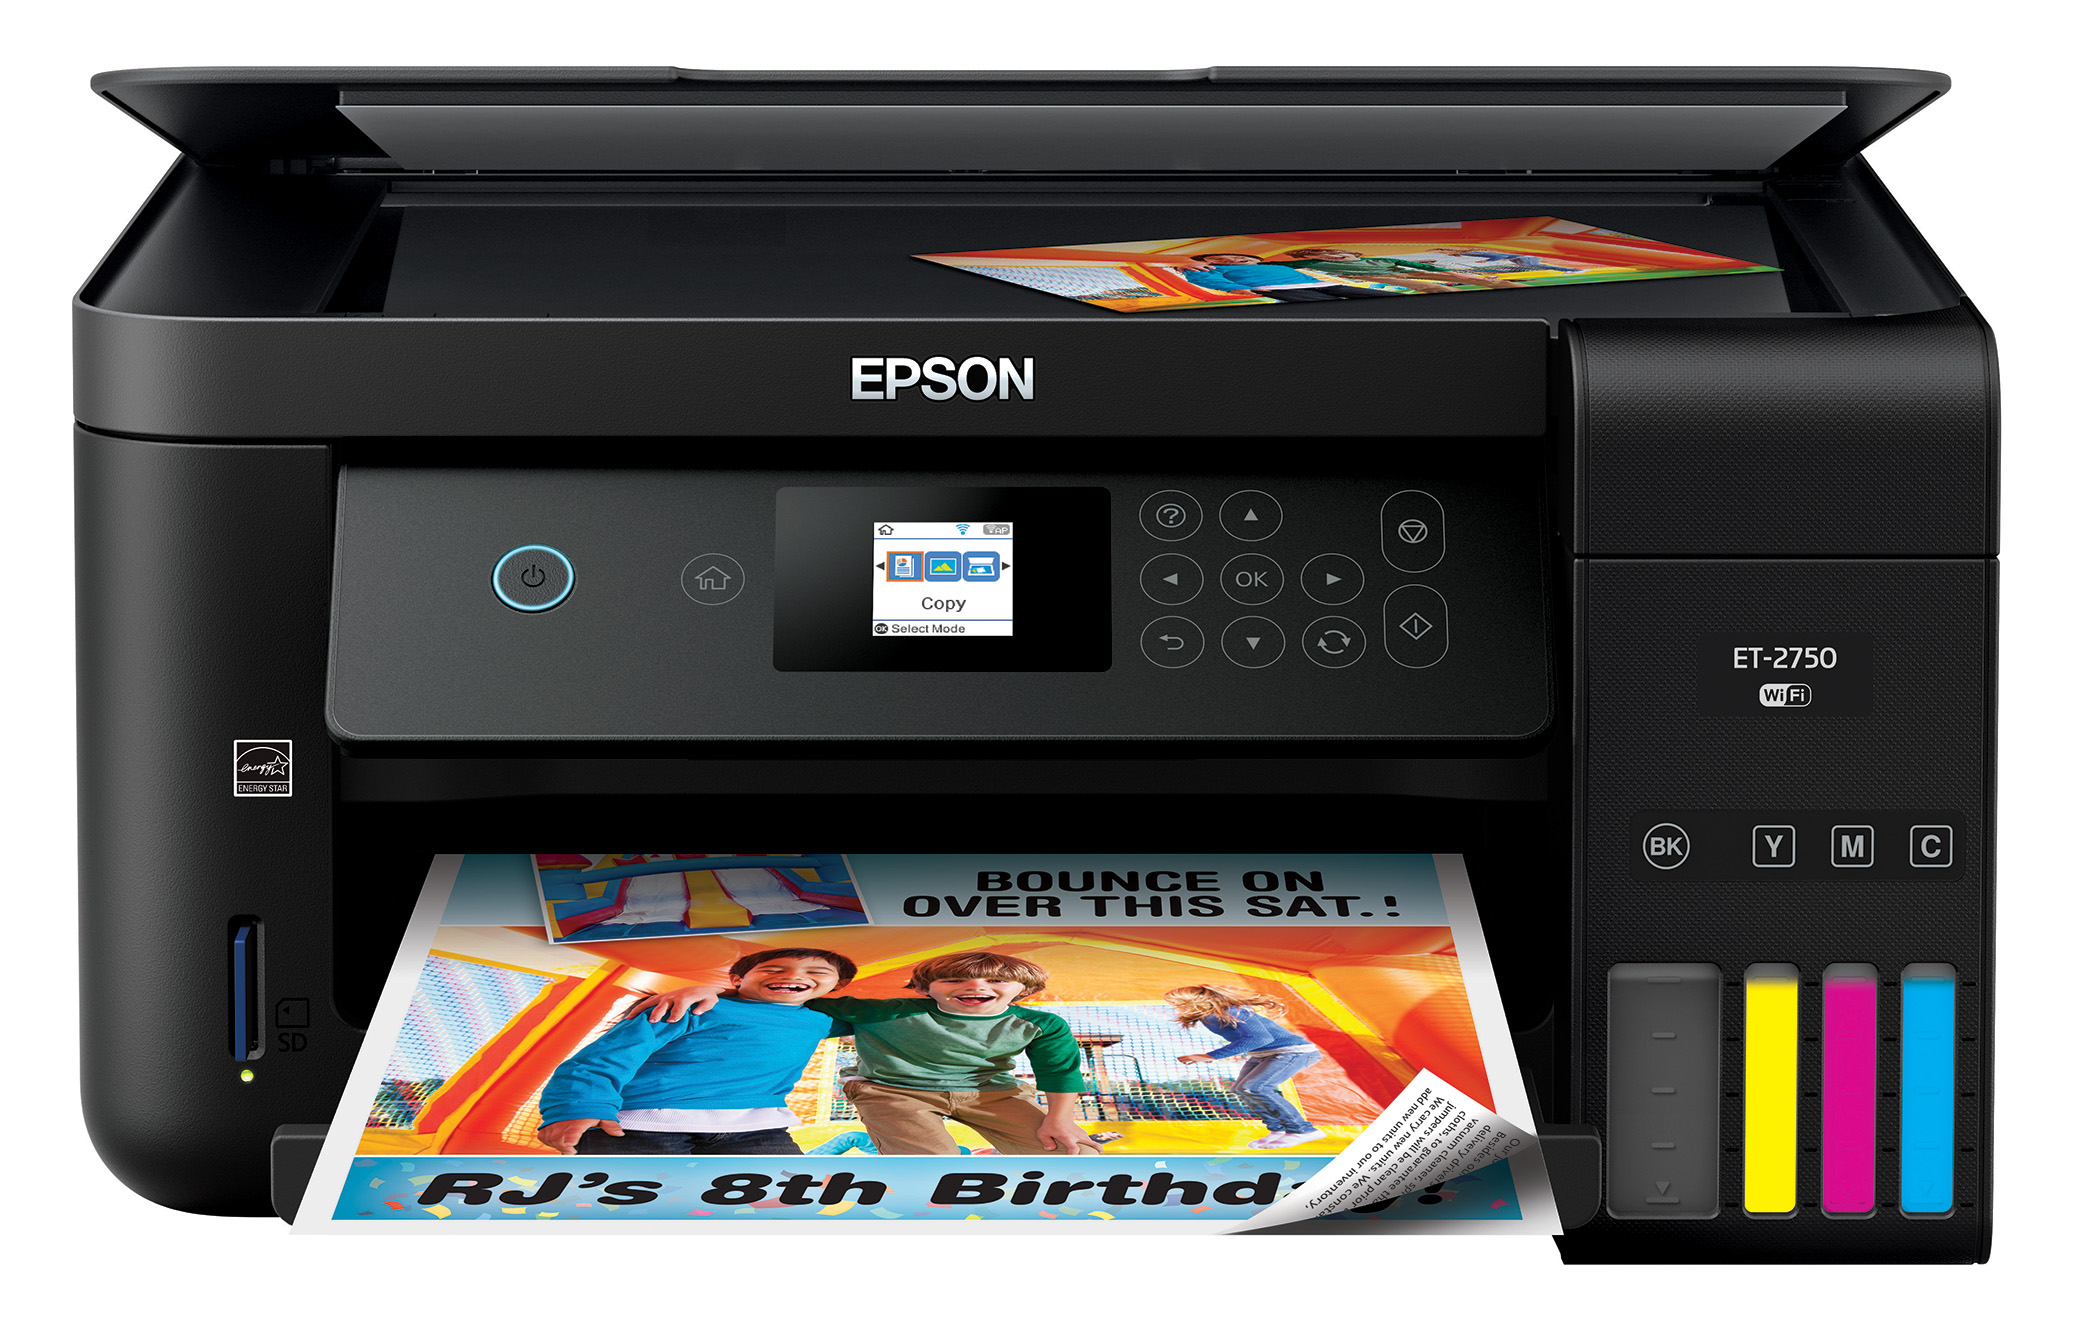 The Epson Expression ET-2750 EcoTank all-in-one features cartridge-free printing and offers an unbeatable combination of value and convenience for the home.